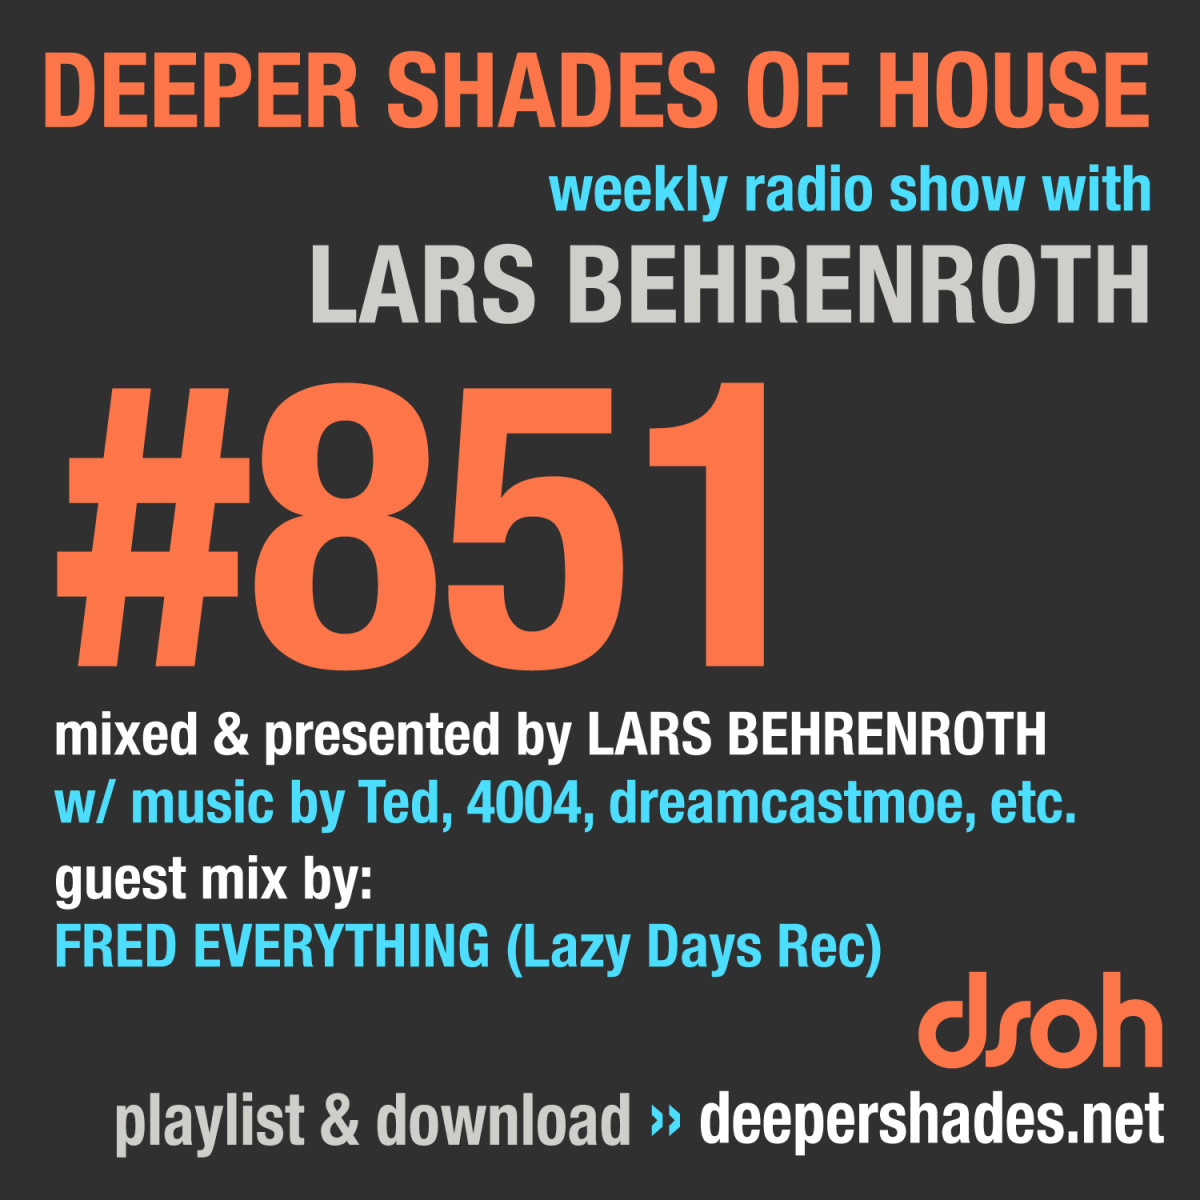 #nowplaying on radio.deepershades.net : Lars Behrenroth w/ exclusive guest mix by @FREDEVERYTHING (Lazy Days Rec, Canada) - DSOH 851 Deeper Shades Of House #deephouse #livestream #dsoh #housemusic